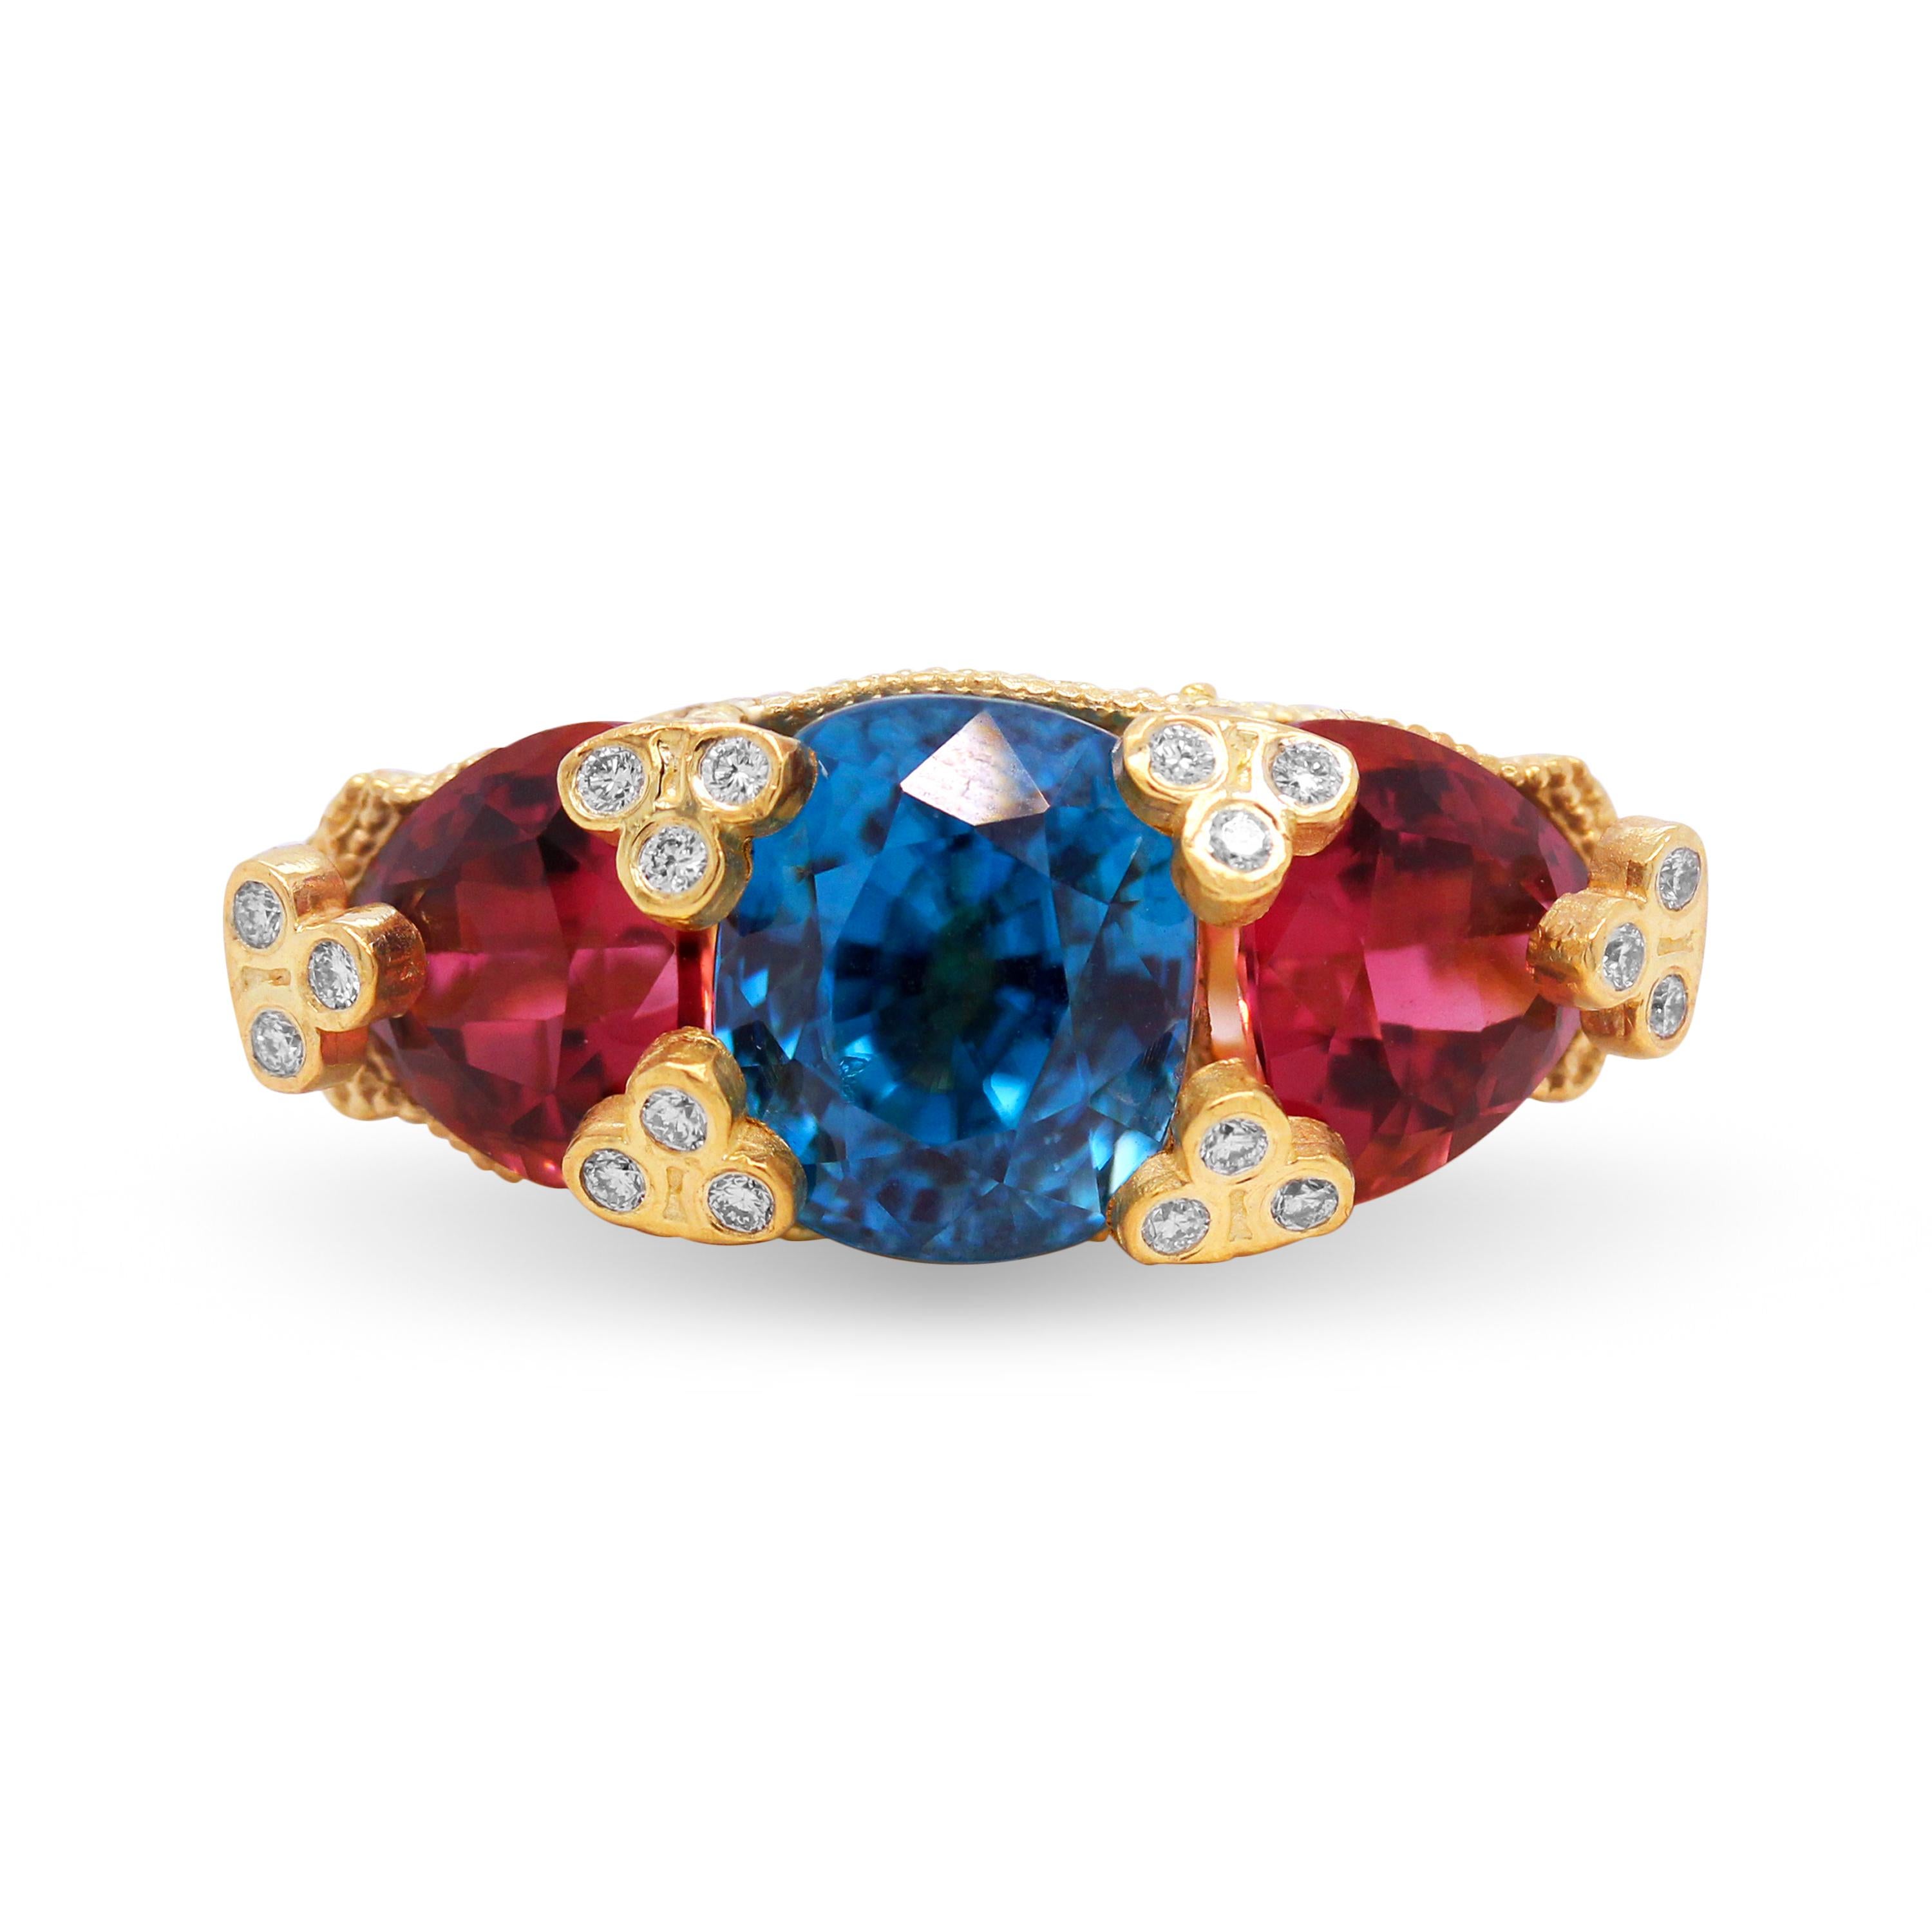 18K Yellow Gold and Diamond Three-Stone Ring with Blue Zircon center and Trillion Rubellites by Stambolian

This state-of-the-art ring by Stambolian is a one-of-a-kind

One cushion cut, Blue Zircon is set in the center with two, trillion-cut